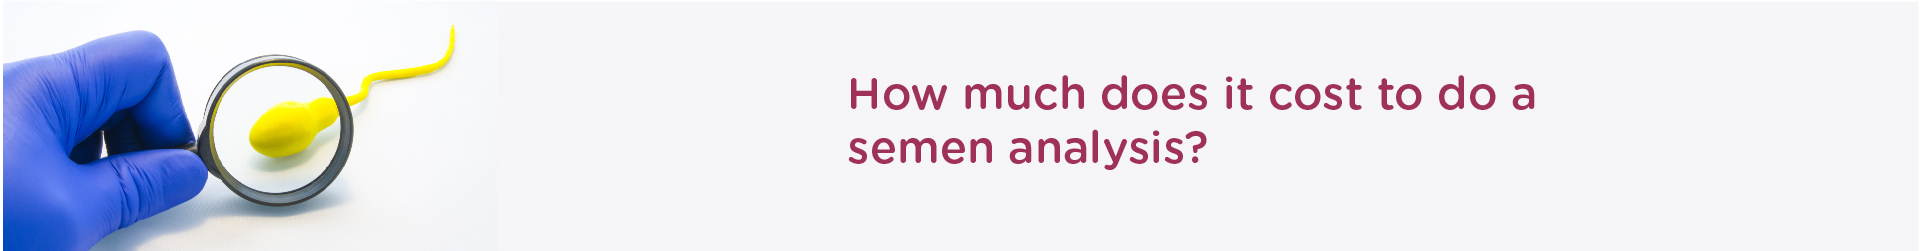 How much does it cost to do a semen analysis?